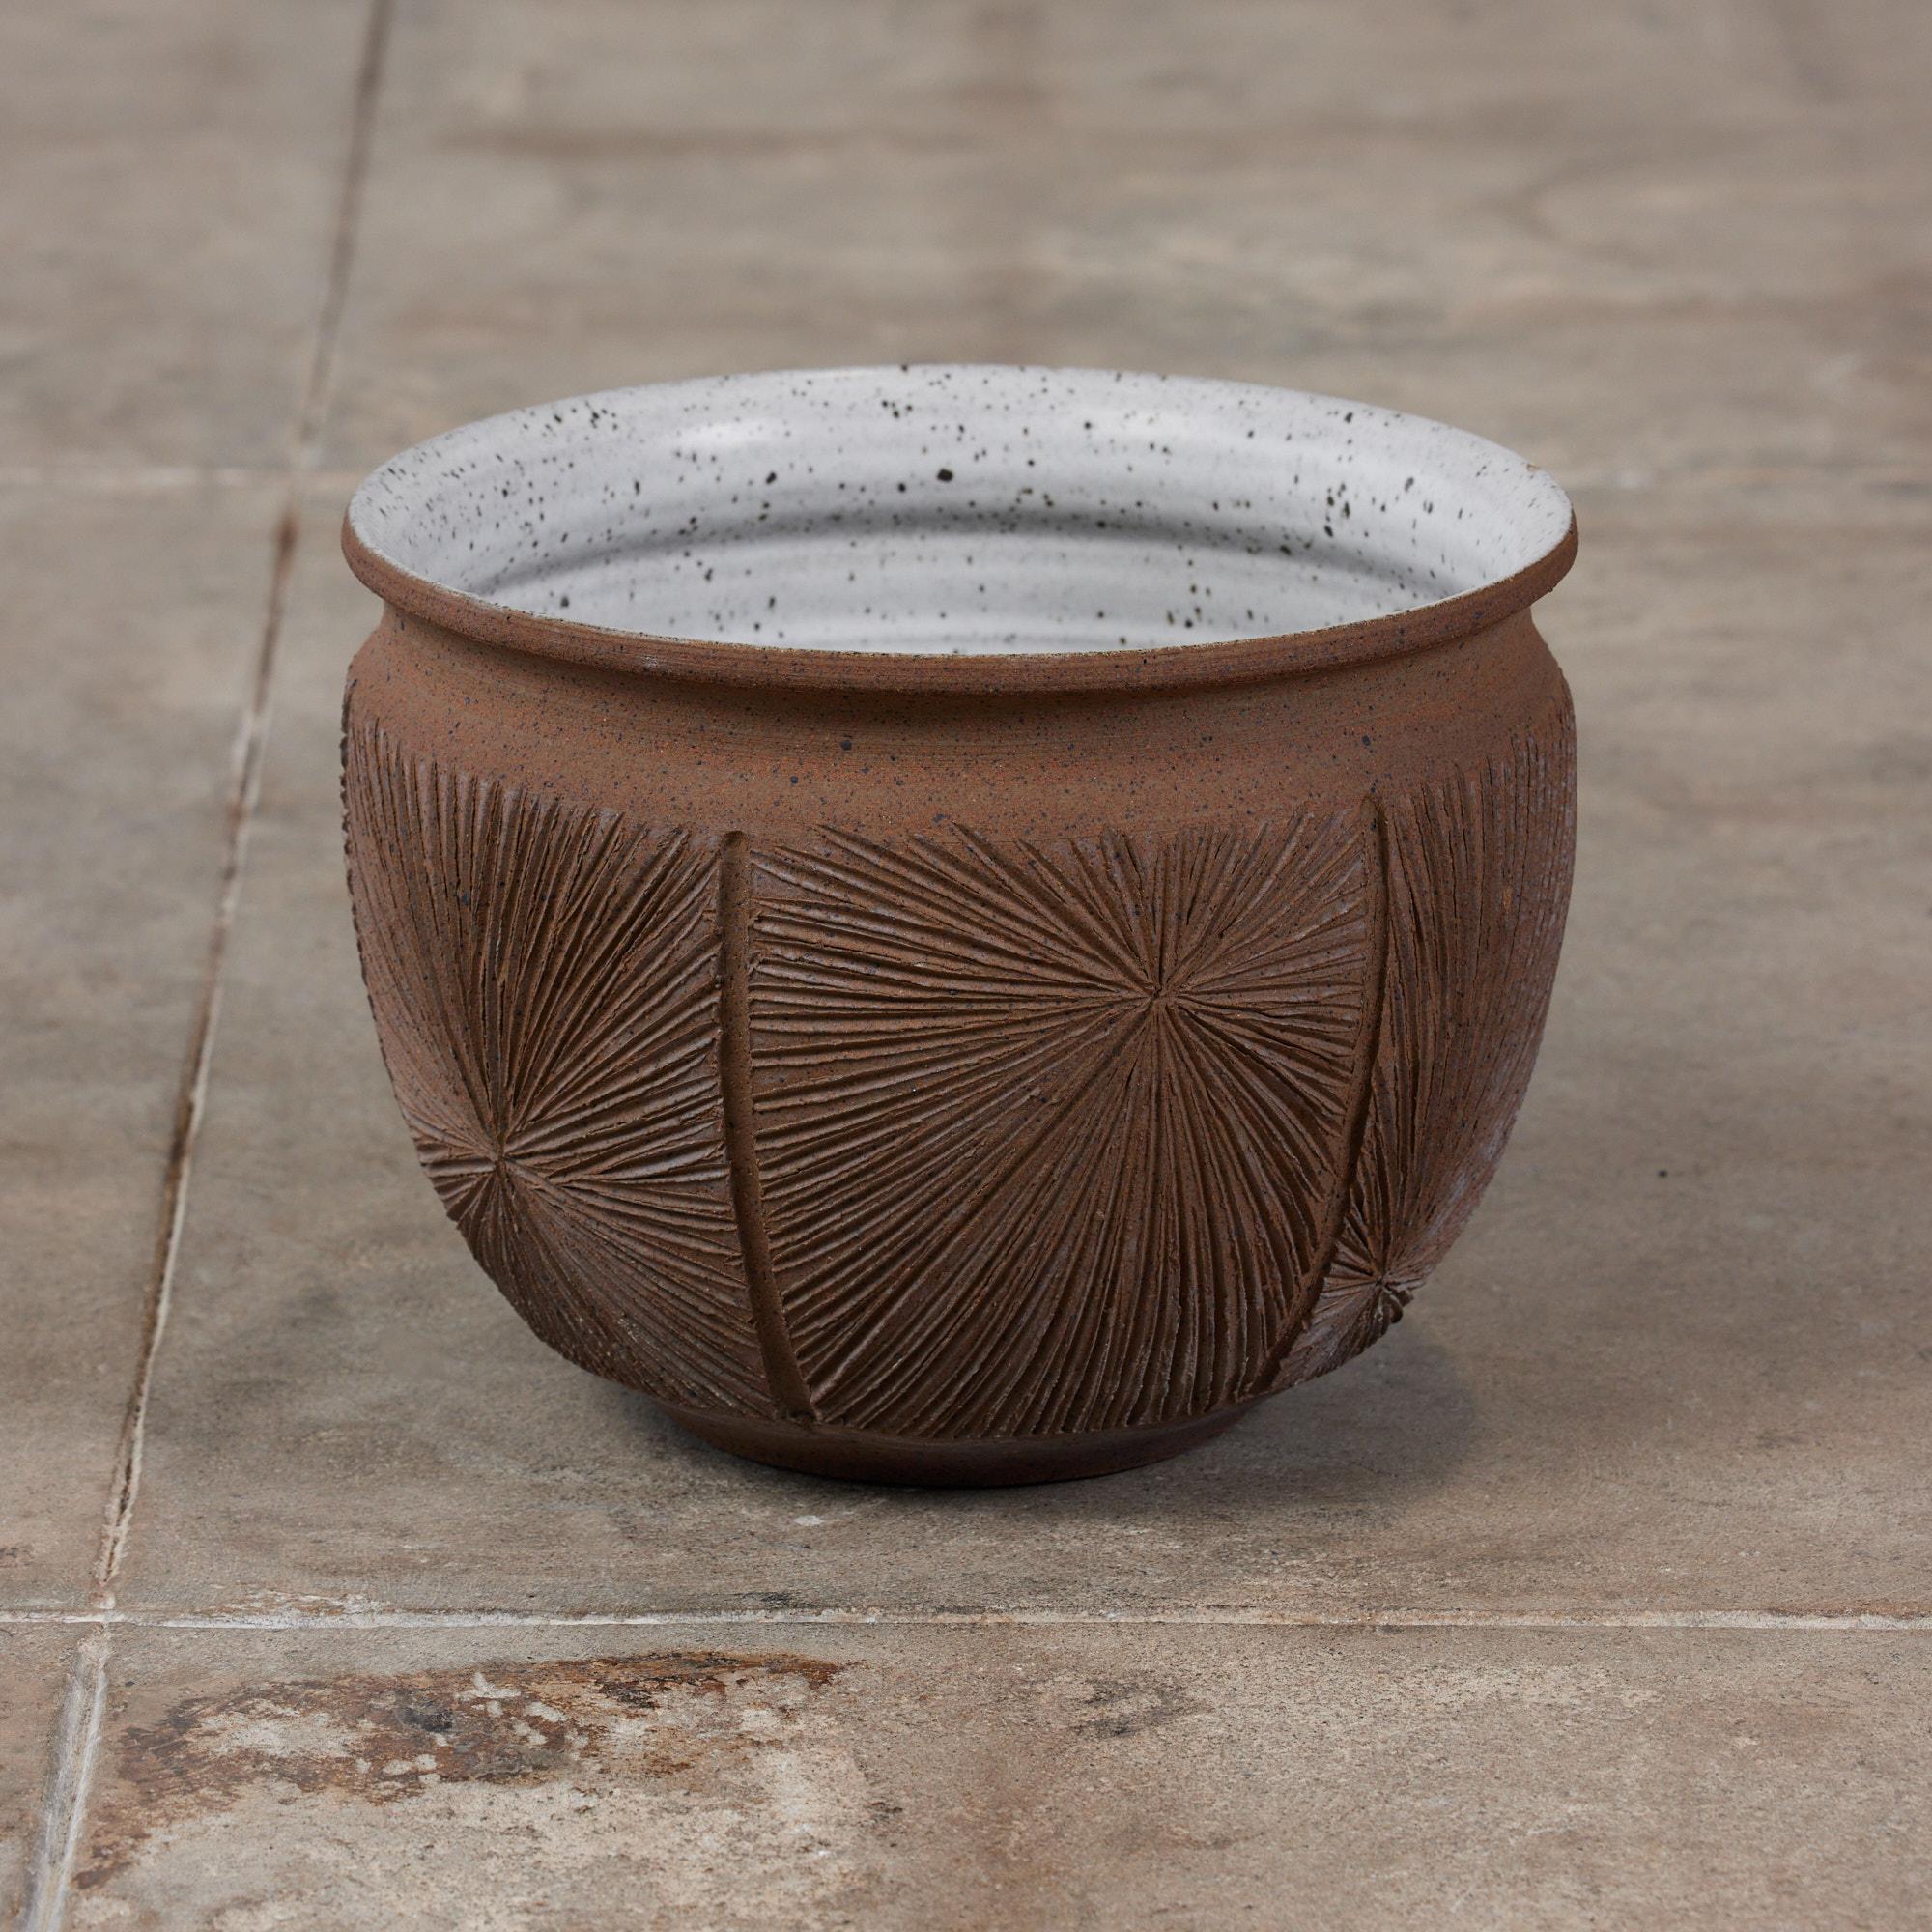 A hand thrown stoneware bowl planter from David Cressey and Robert Maxwell's 1970s collaboration Earthgender. The planter has a rounded lip, an incised all-over pattern in the 